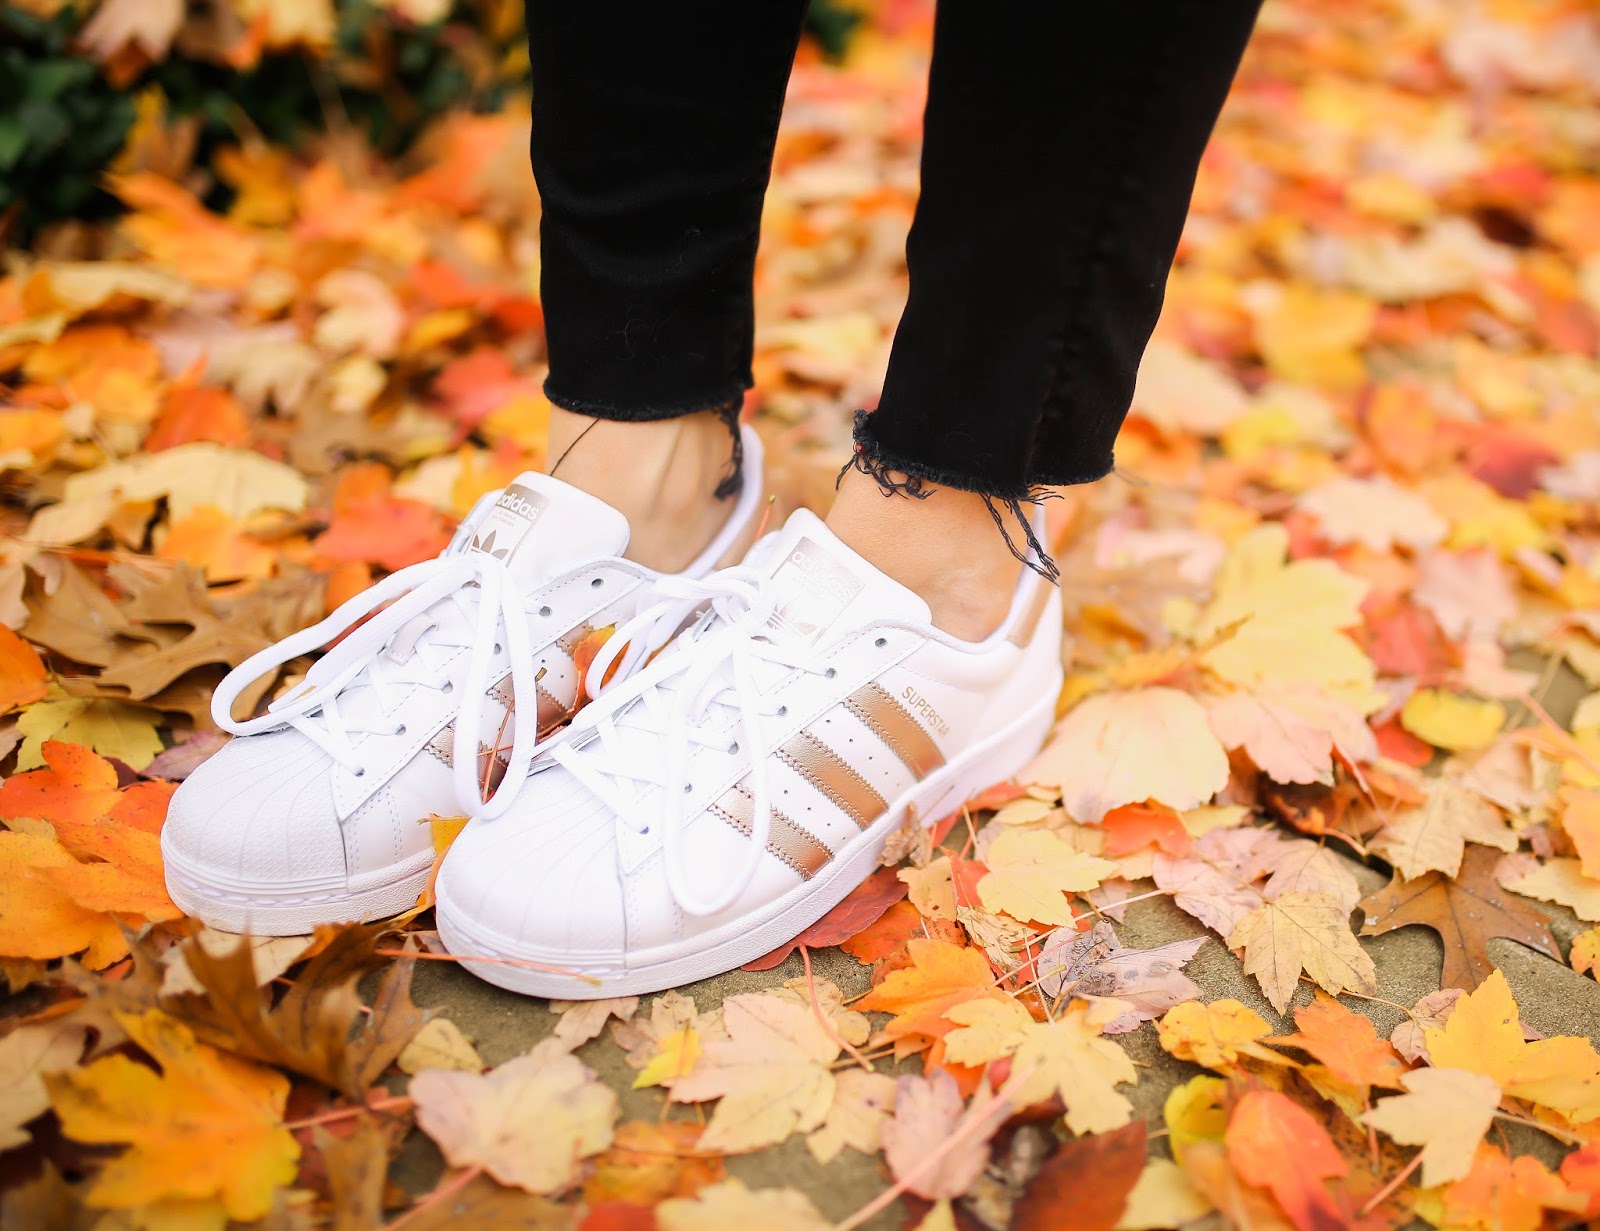 Styling Adidas Superstars | The Sweetest